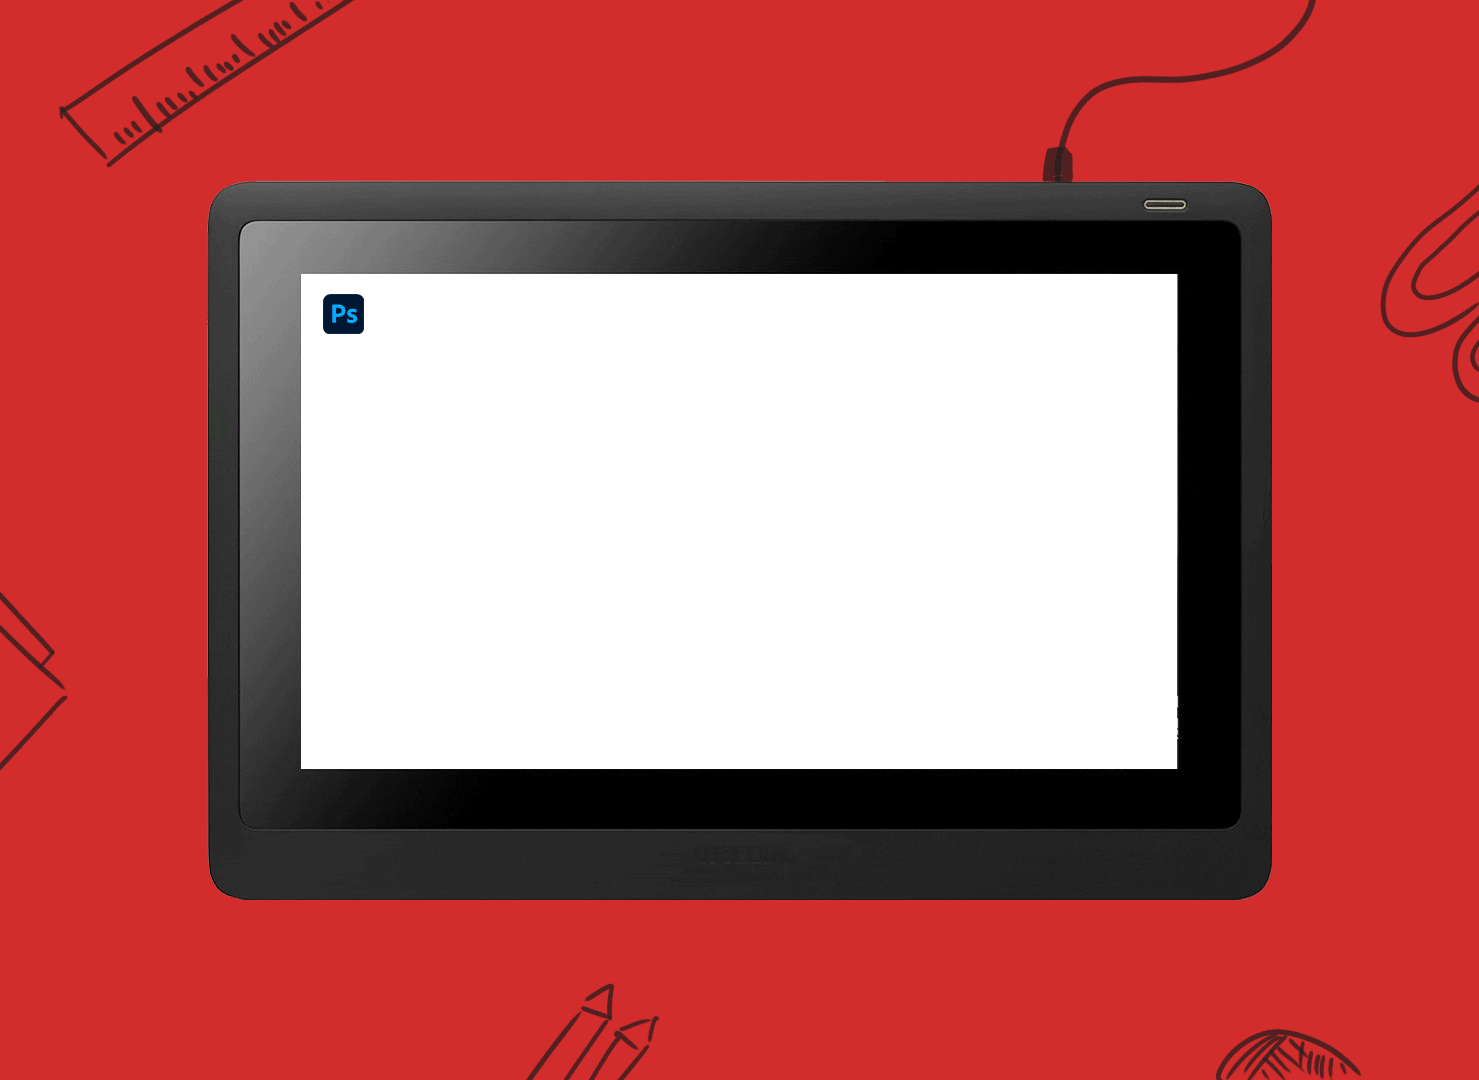 The Adobe logo being drawn on a tablet